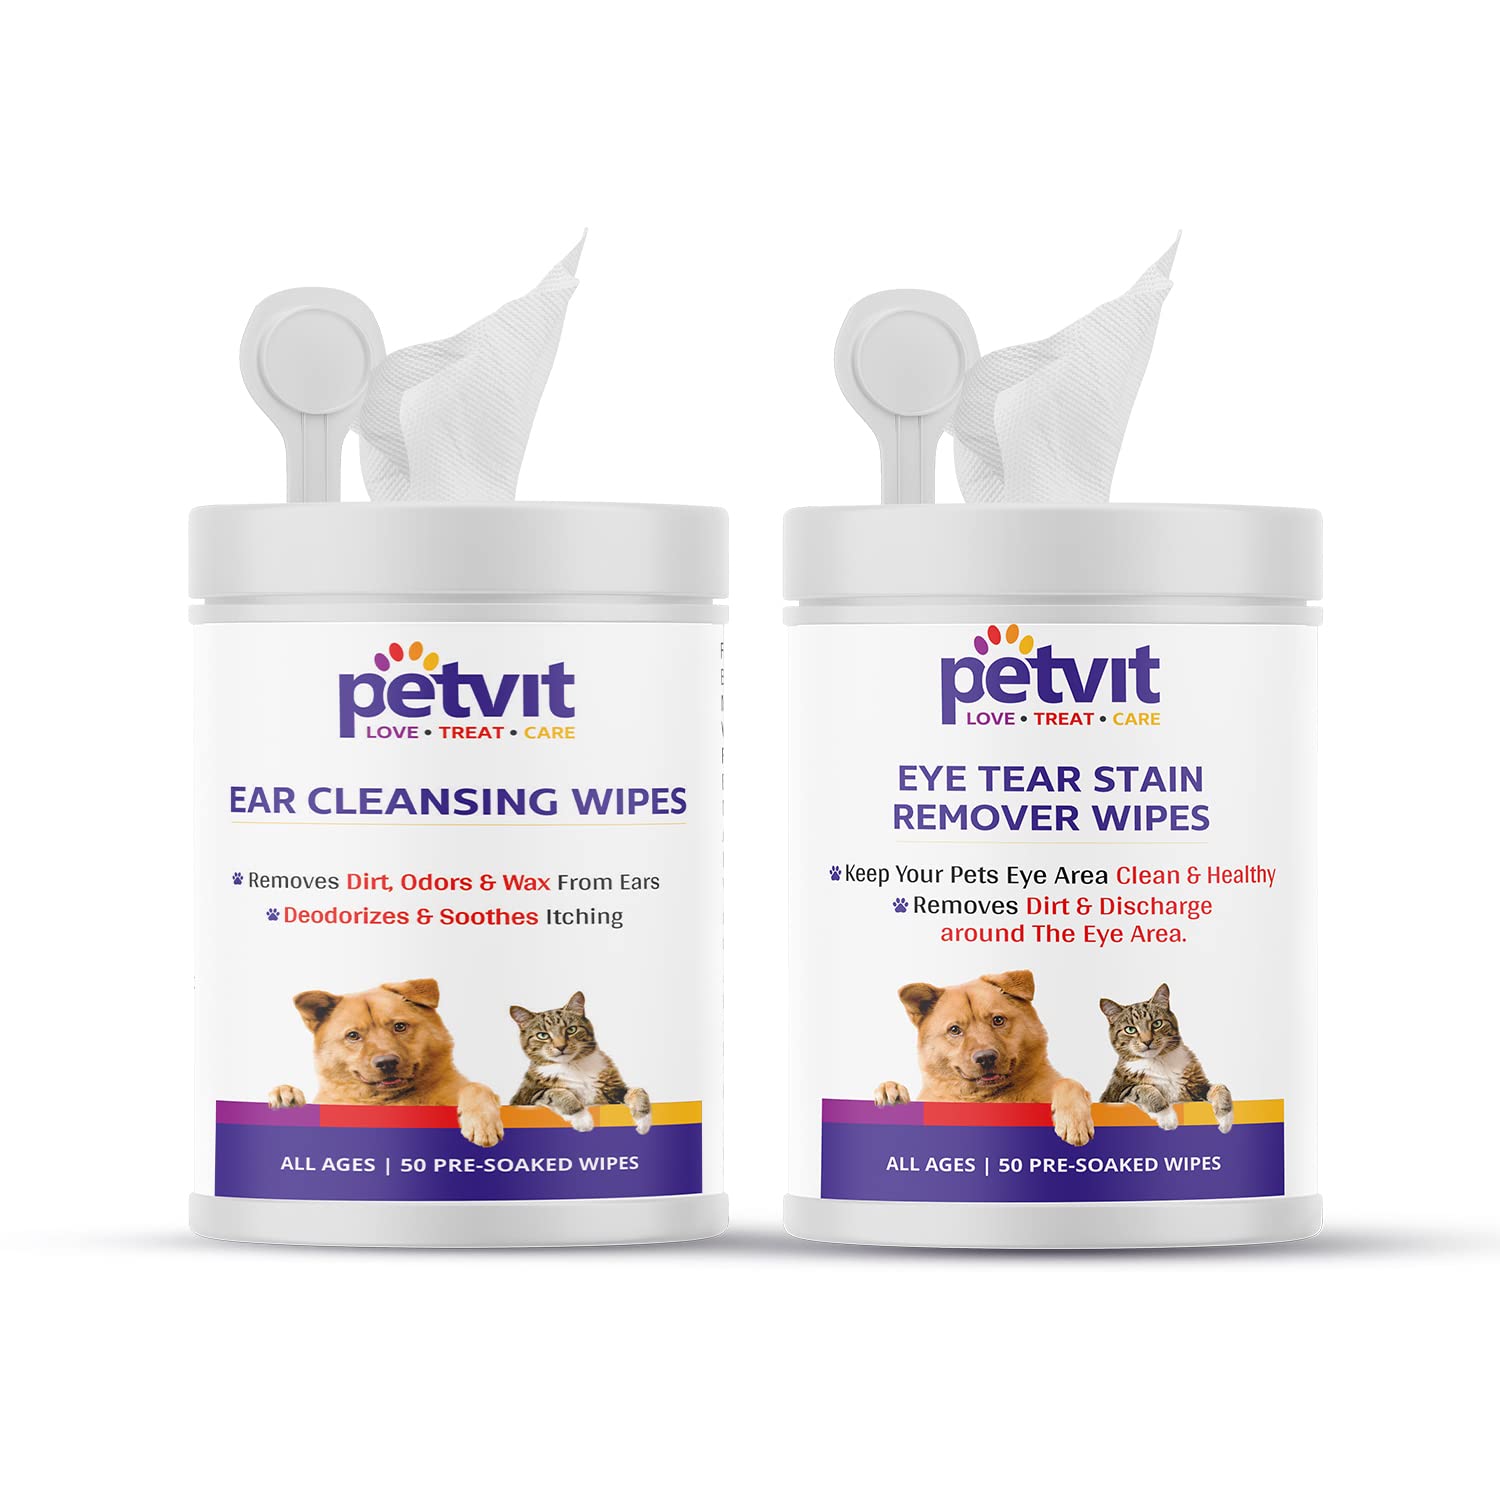 Petvit Ear Cleansing Wipes Remove Dirt, Odors & Wax from Ears  - Fragrance Less 50 Wipes & Eye Tear Stain Remover Wipes for Dogs and Cats - Fragrance Less 50 Wipes | for All Age Group (Combo)